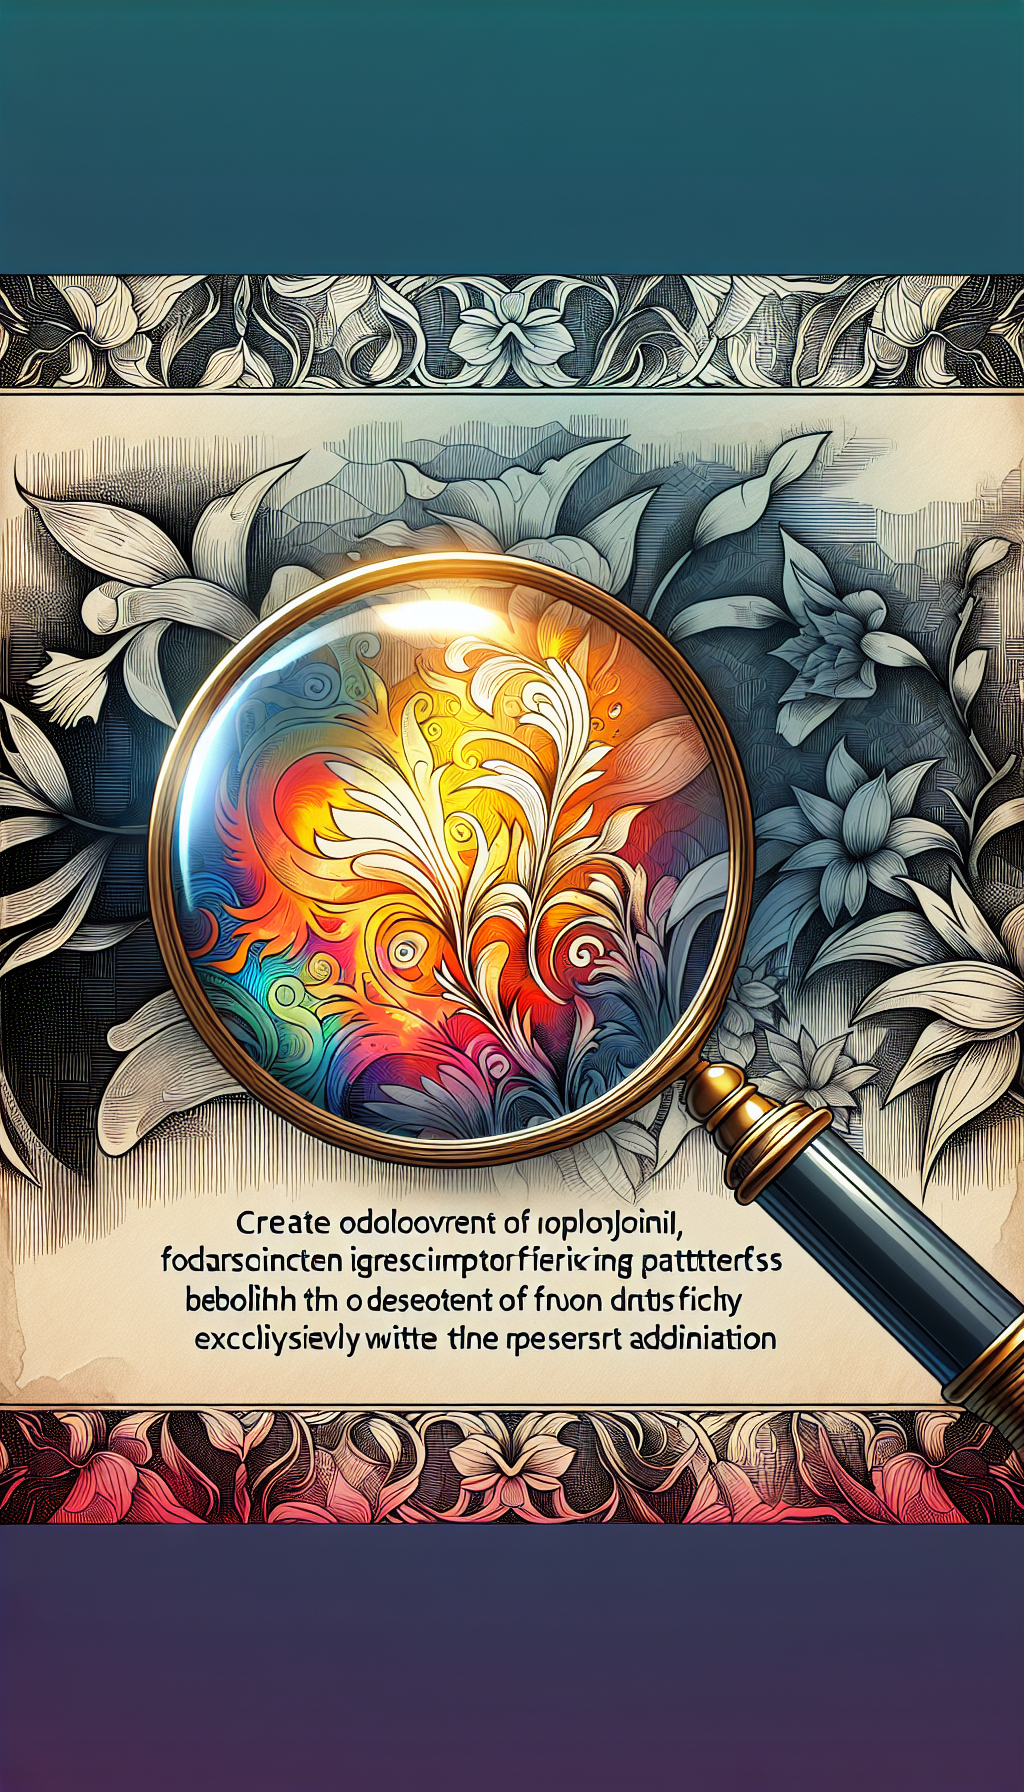 An illustration of an elegant, translucent magnifying glass revealing vibrant, long-lost Fire-King patterns beneath layers of monochrome, forgotten sketches. These rare designs subtly transition from sketch lines to vivid colors only within the focused lens, symbolizing the rediscovery and identification of the once discontinued treasures, hinting at the blend of past obscurity and present appreciation.